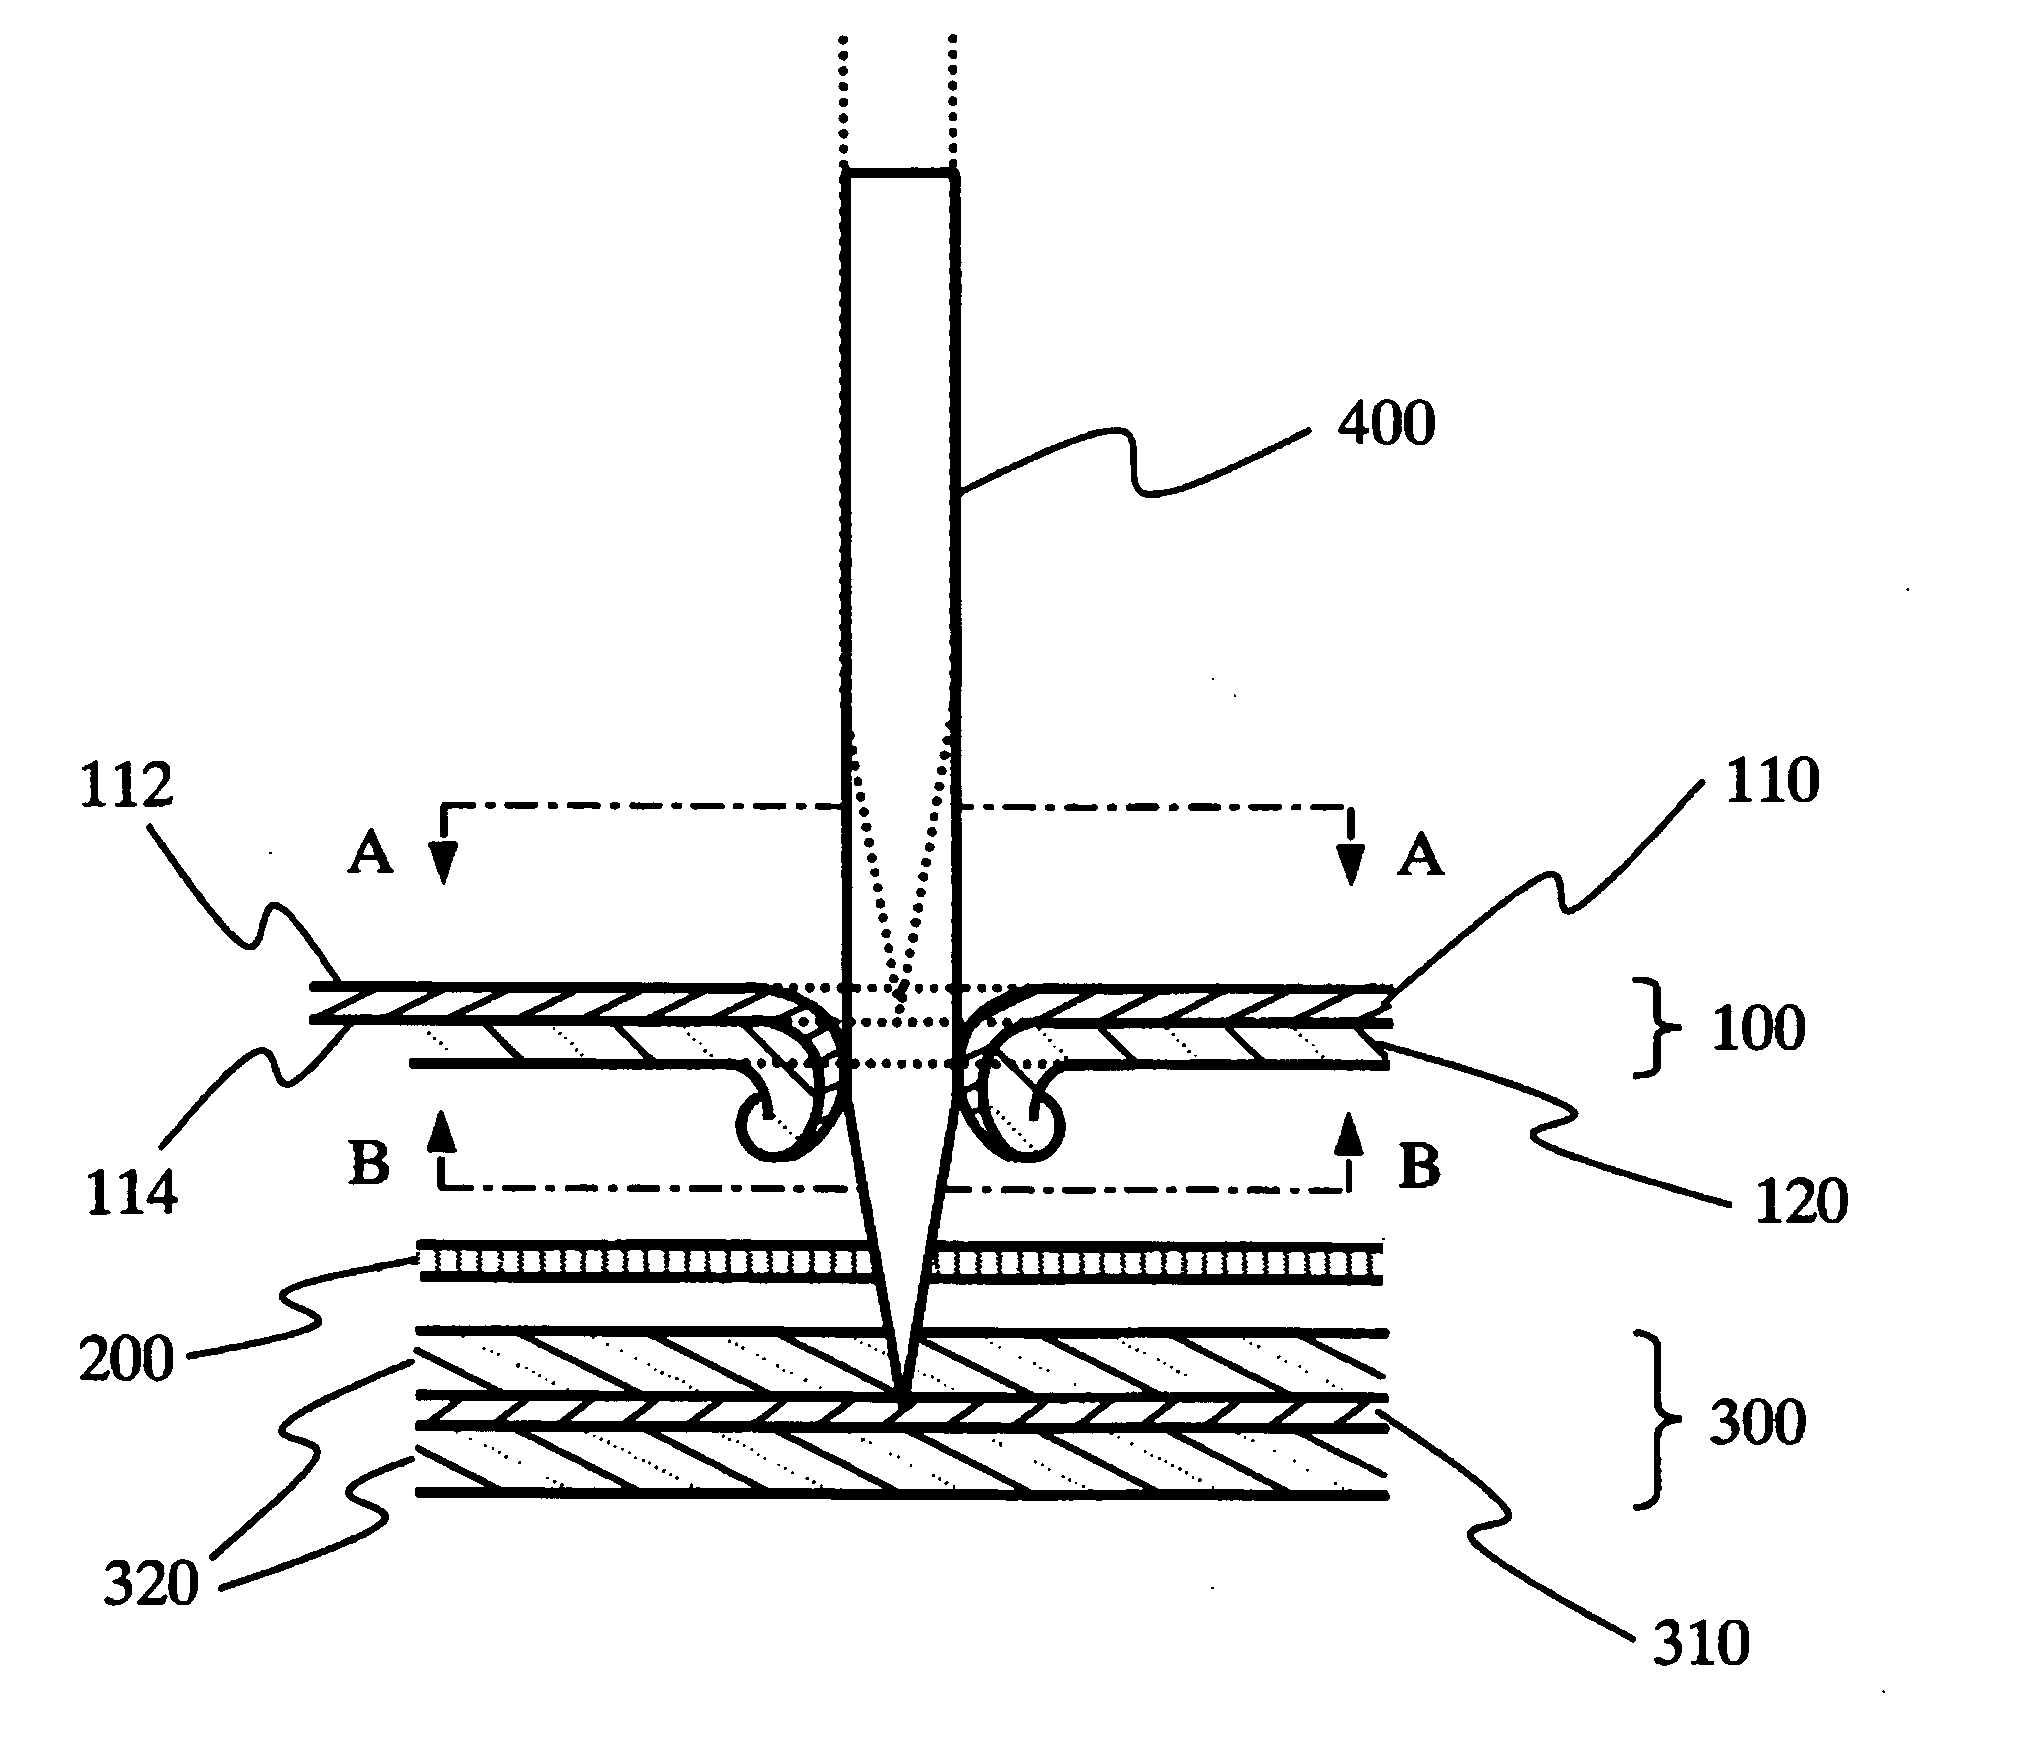 Electrochemical cell having an improved safety